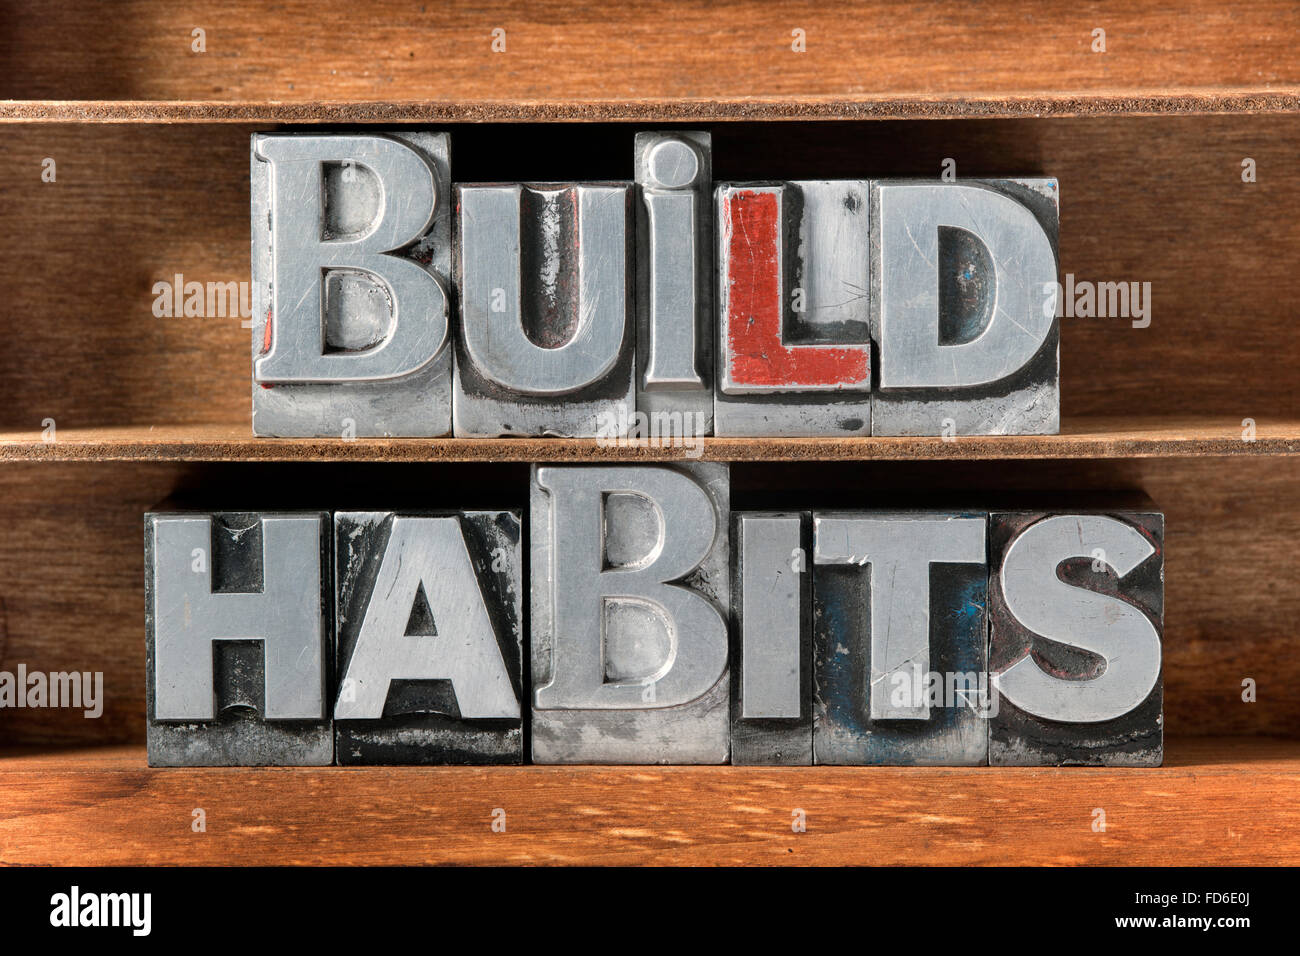 build habits phrase made from metallic letterpress type on wooden tray Stock Photo